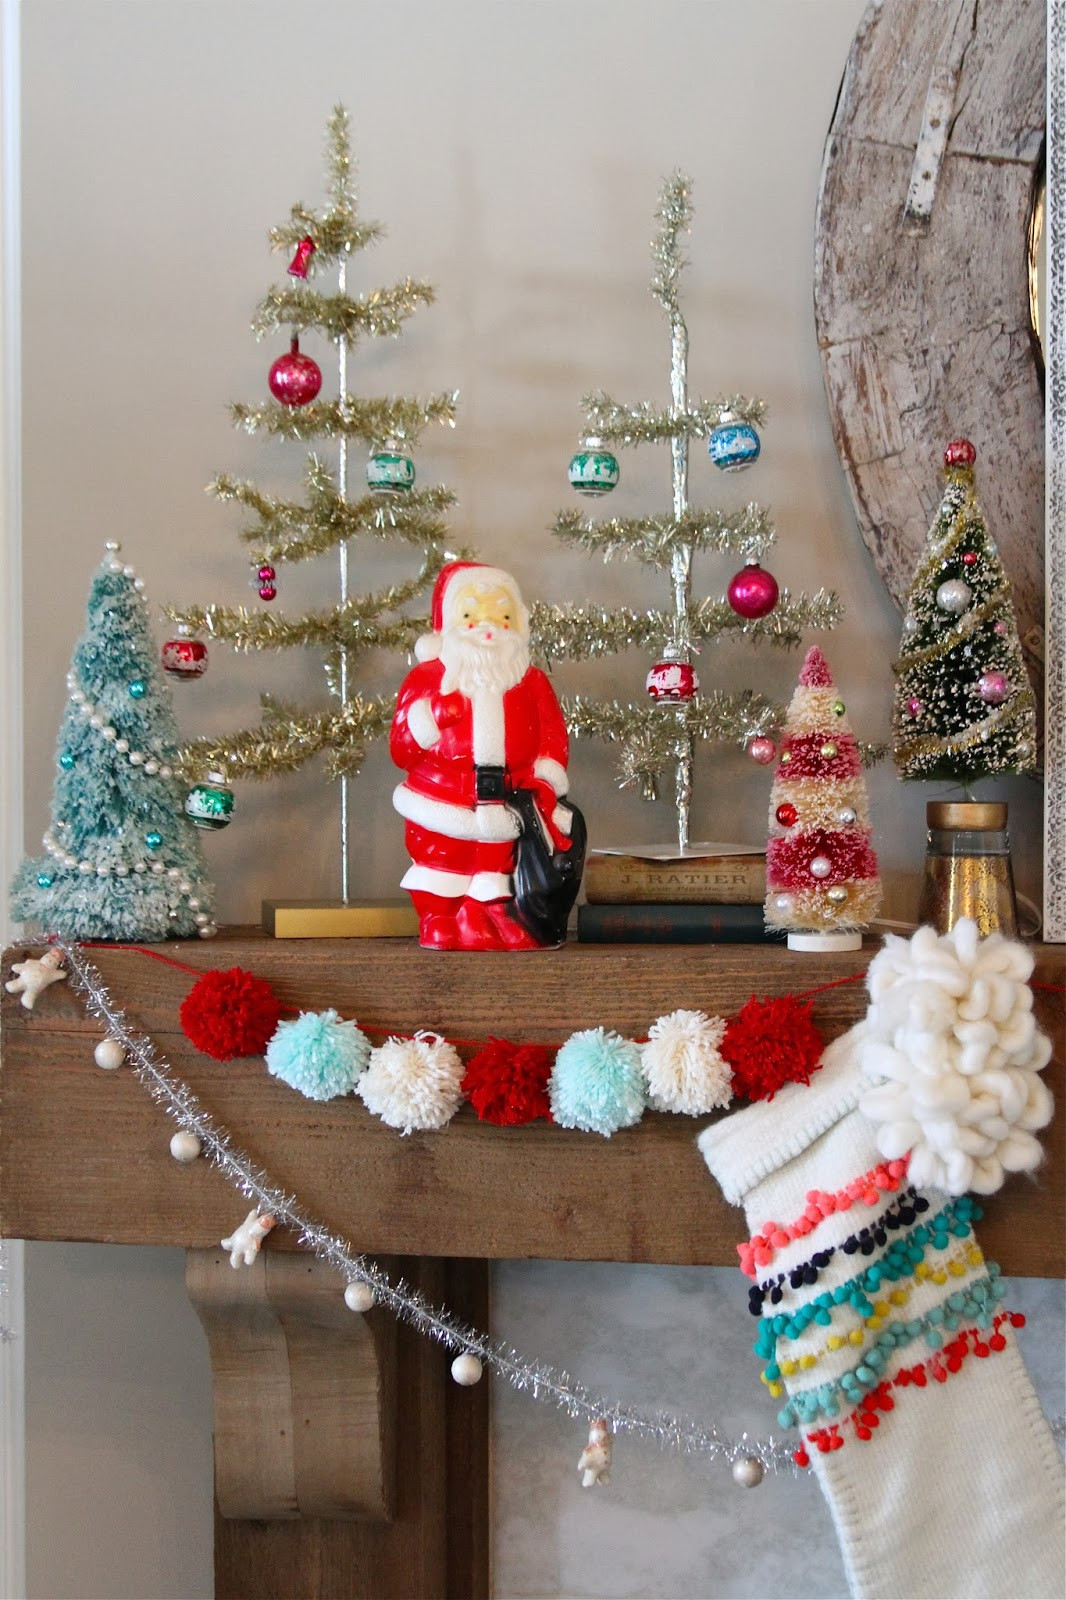 Vintage Christmas Decorating Ideas
 Nesting in the Bluegrass Vintage inspired Christmas mantel